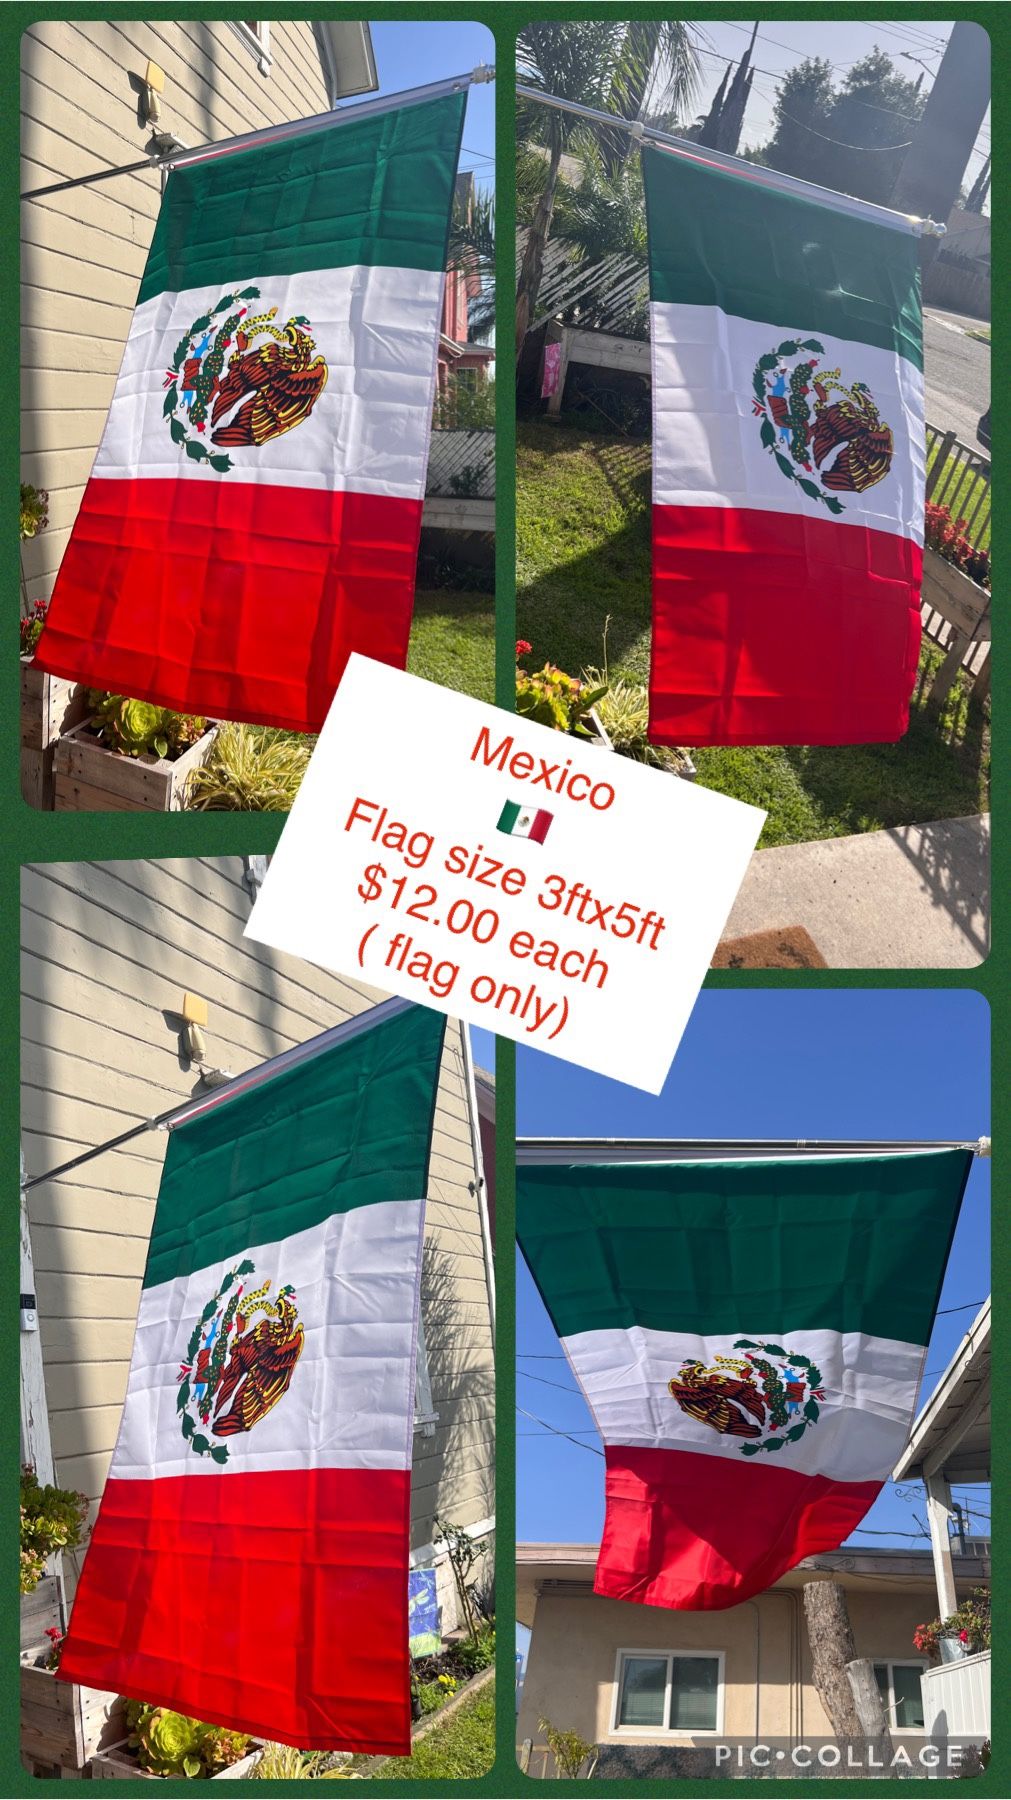 Mexico Flag Size 3ftx5ft 